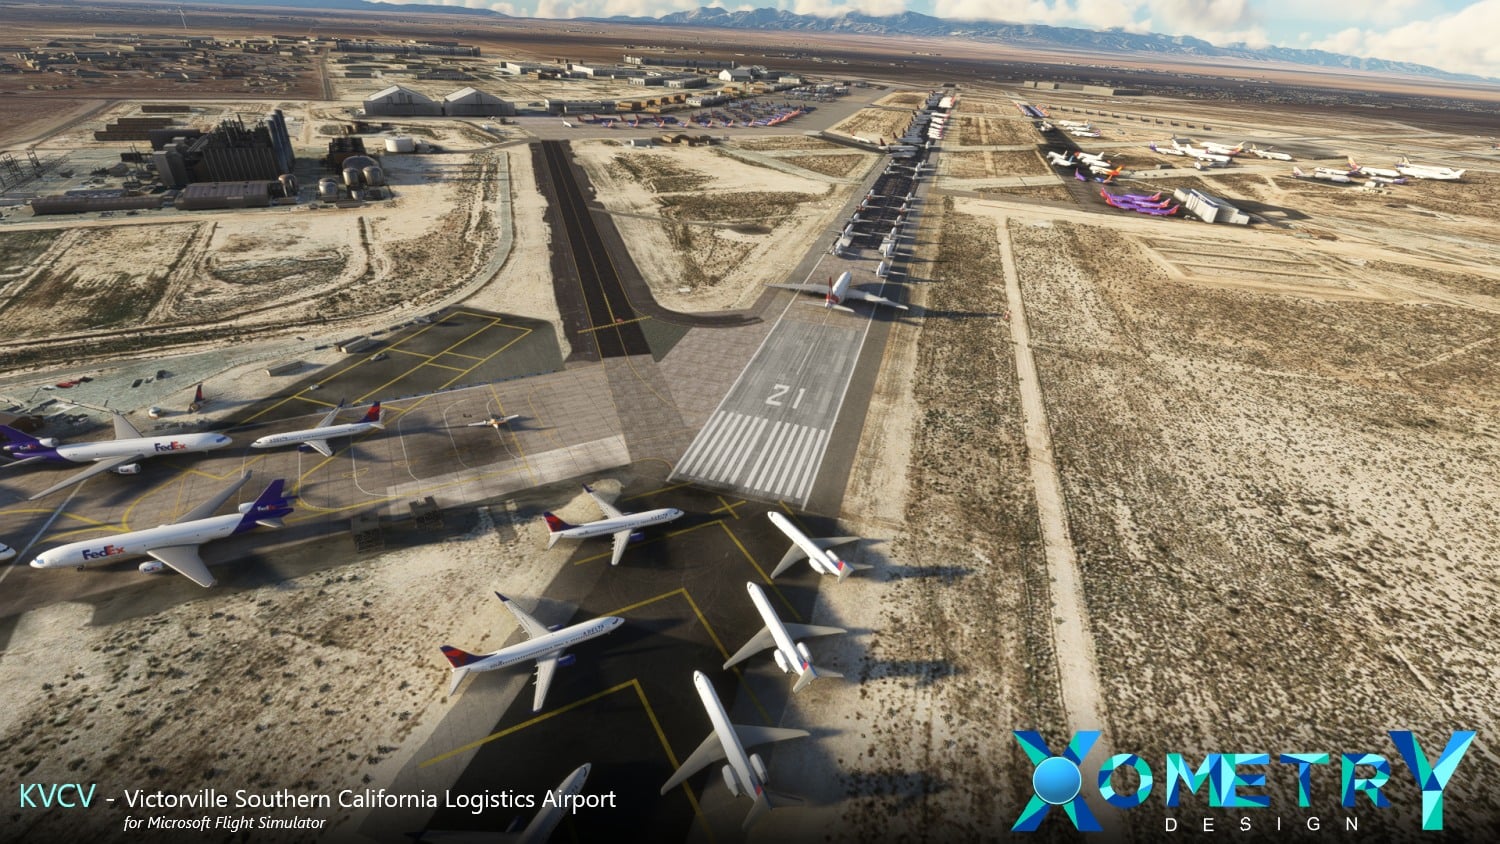 Xometry Design Announces Victorville for MSFS - IniBuilds, X-Plane, Xometry